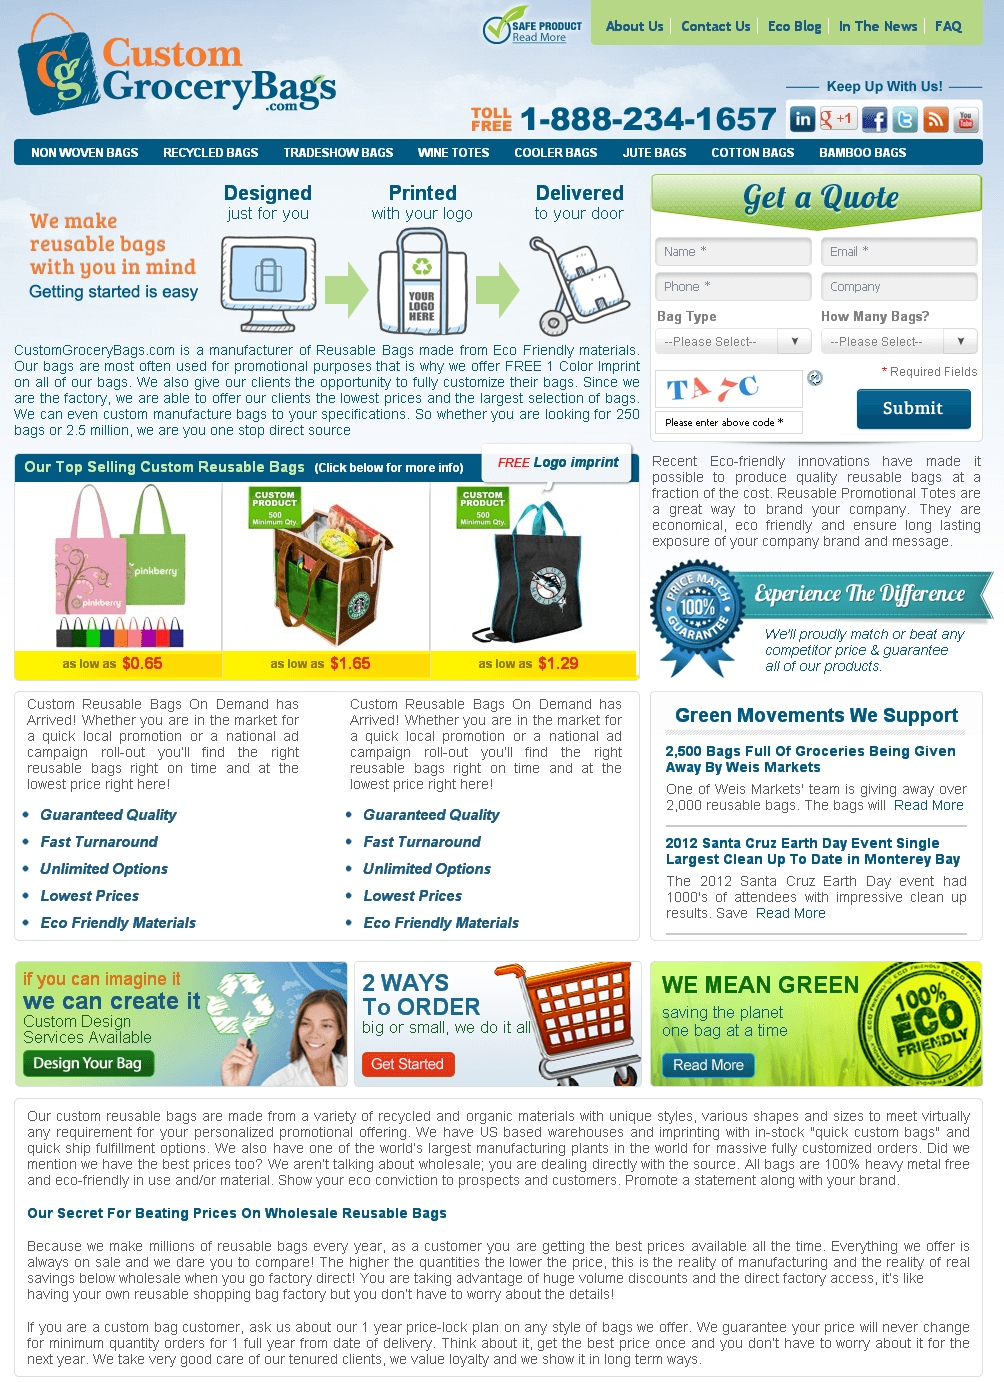 An Ecommerce Site for Selling Reusable Bags